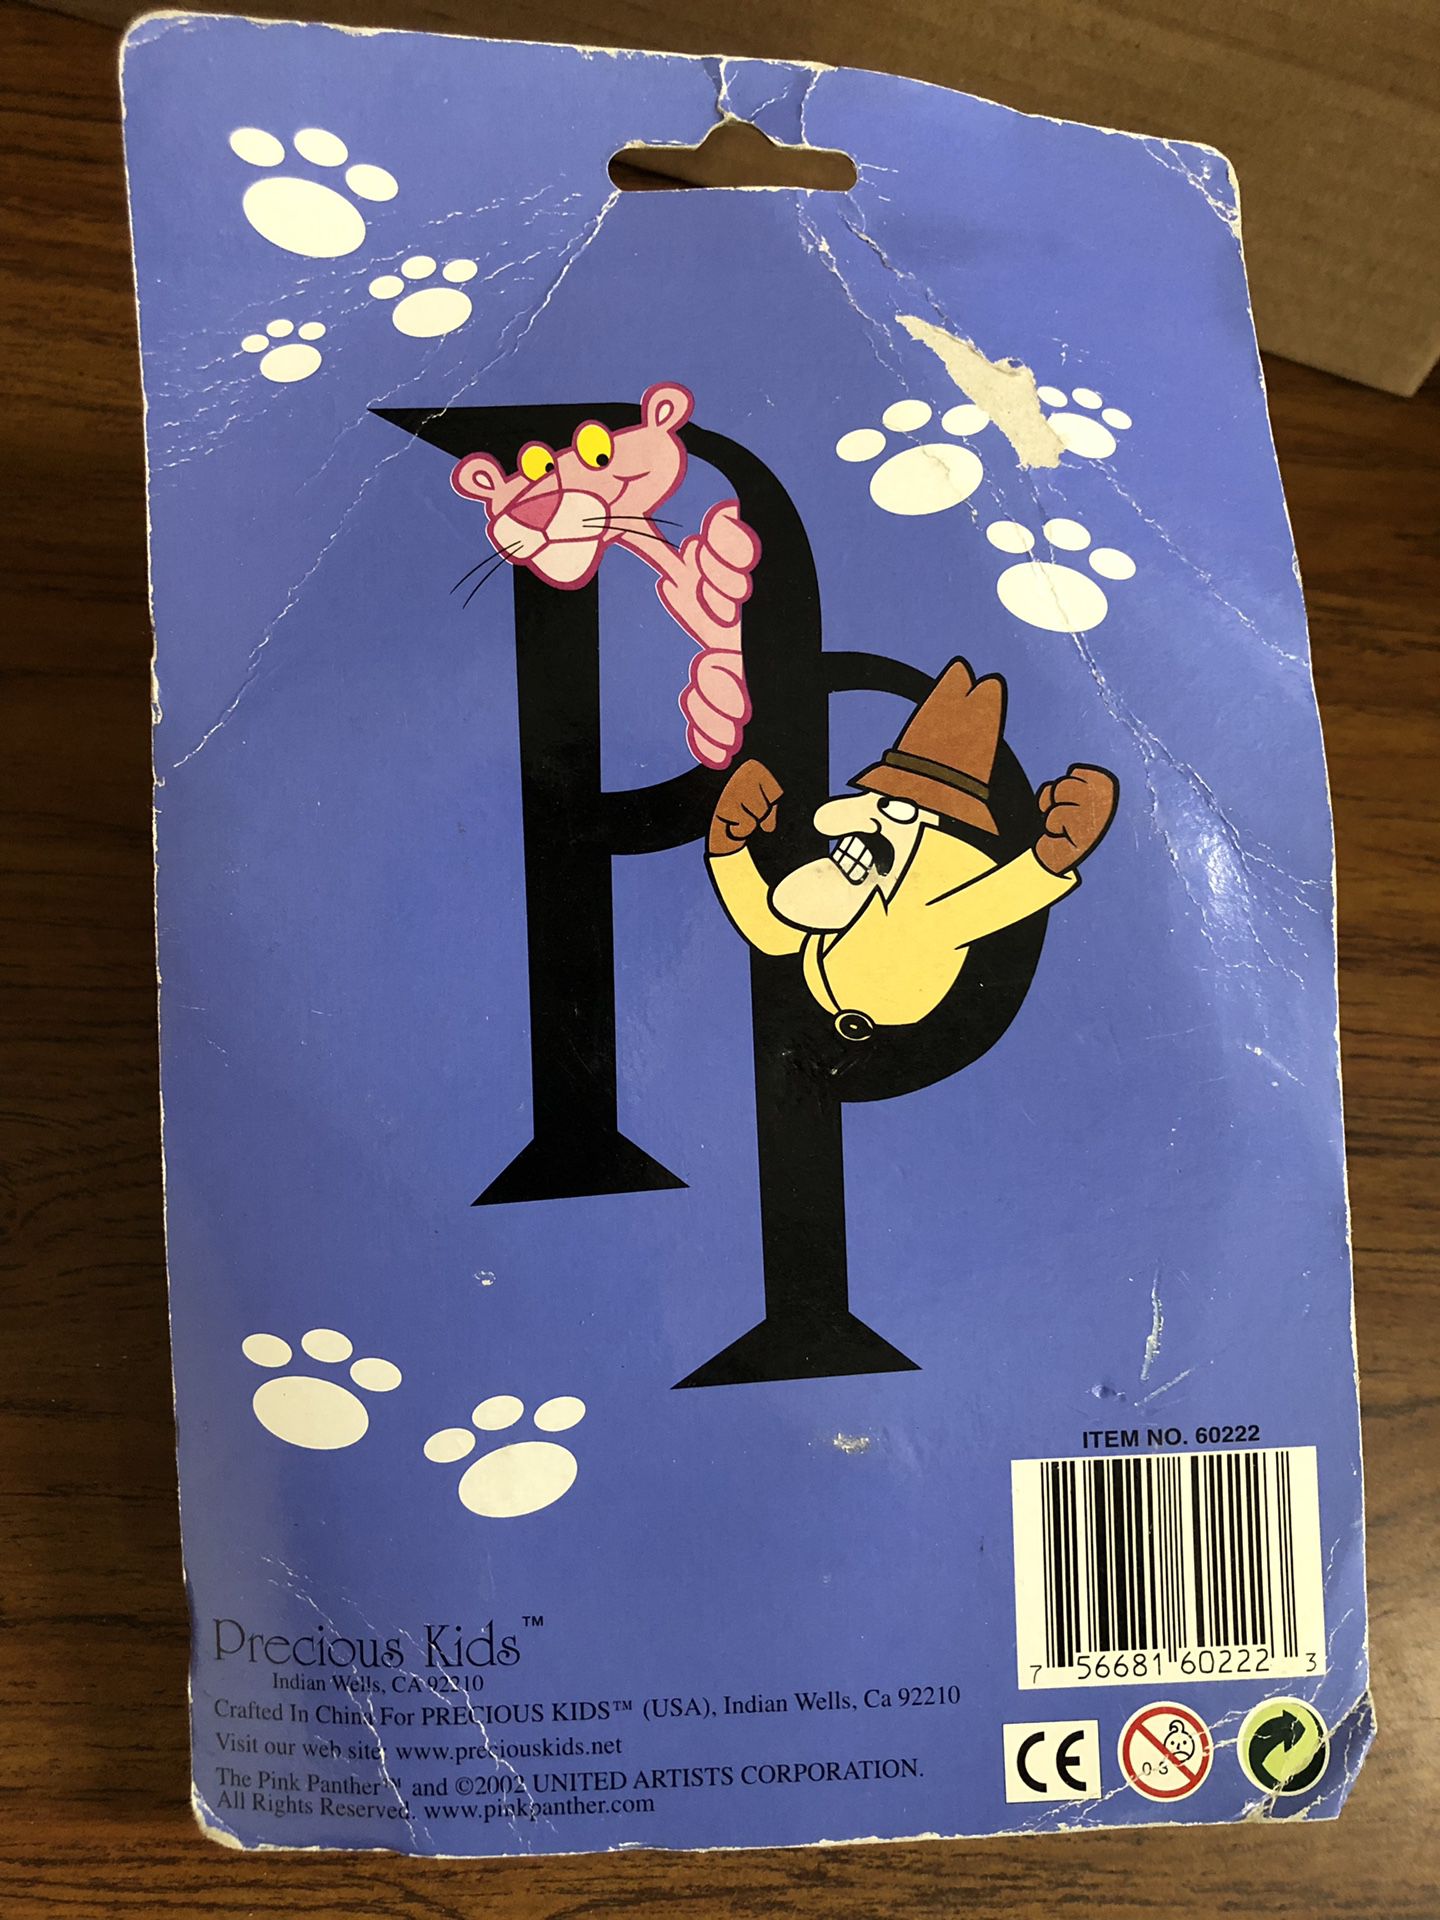 The Pink Panther Classic Cartoon Collection, Vol. 3: Frolics in the Pink  DVD for Sale in Chino, CA - OfferUp